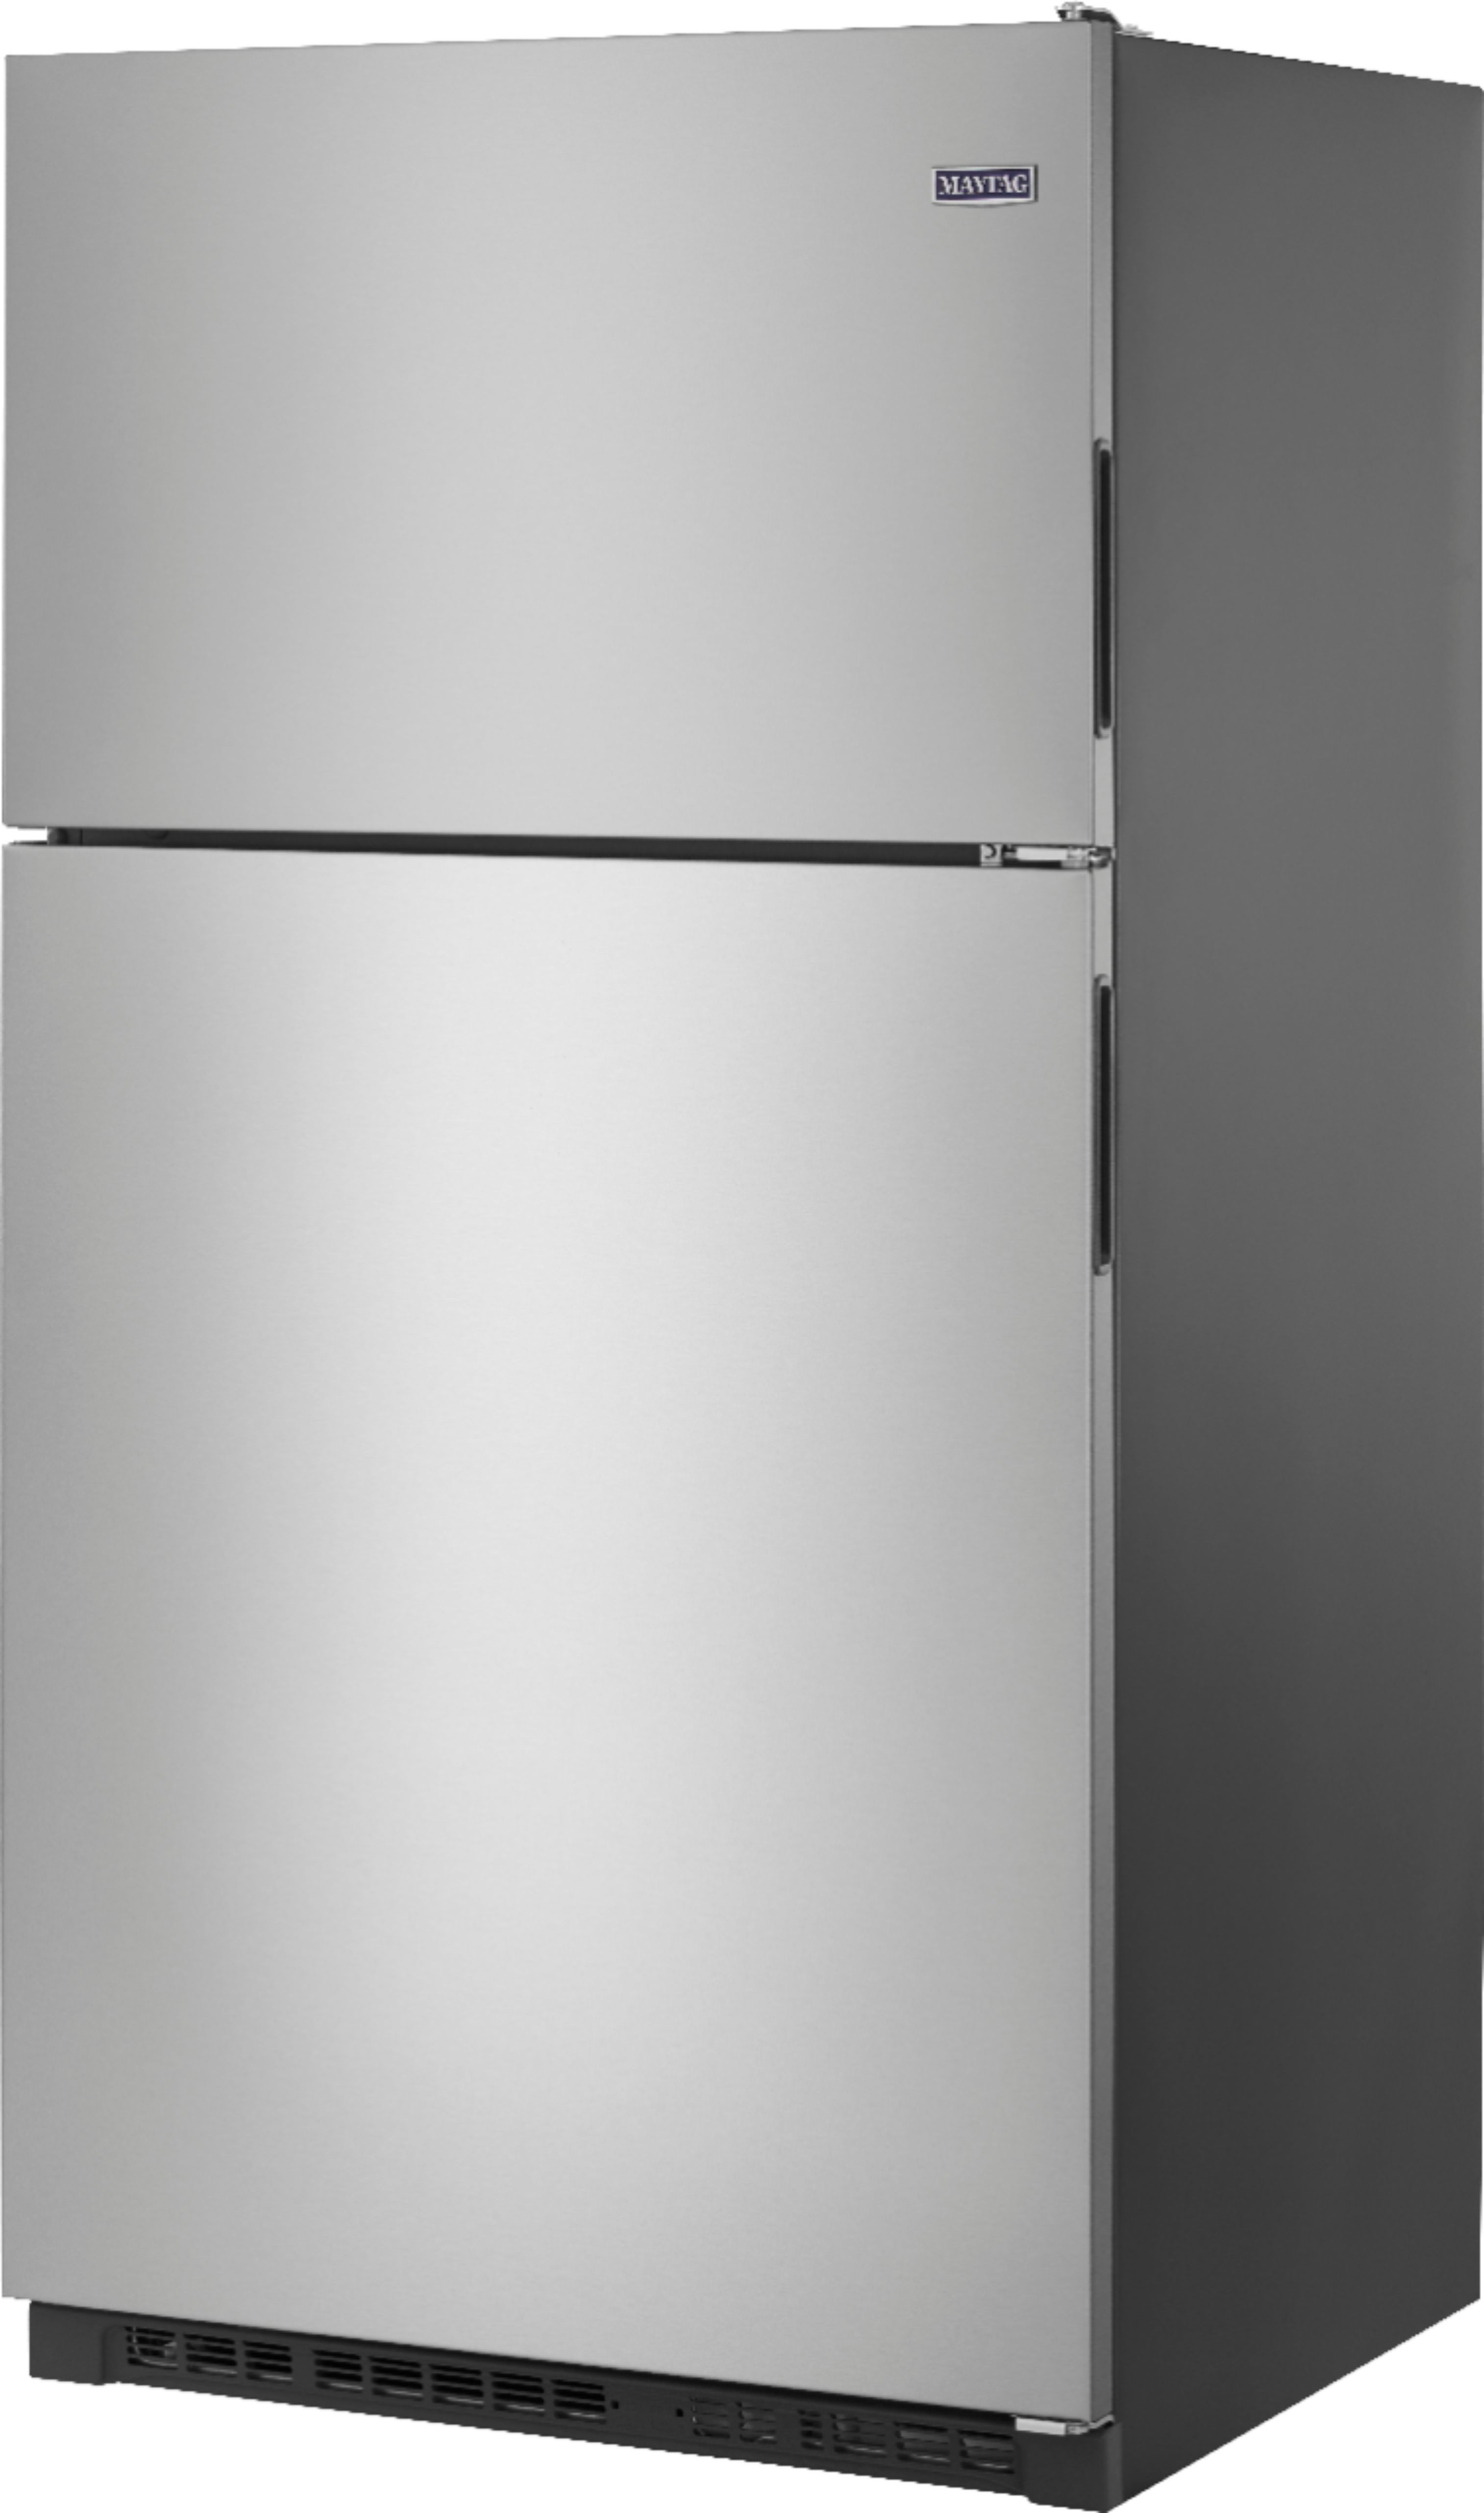 Left View: Maytag - 20.5 Cu. Ft. Top-Freezer Refrigerator - Stainless steel